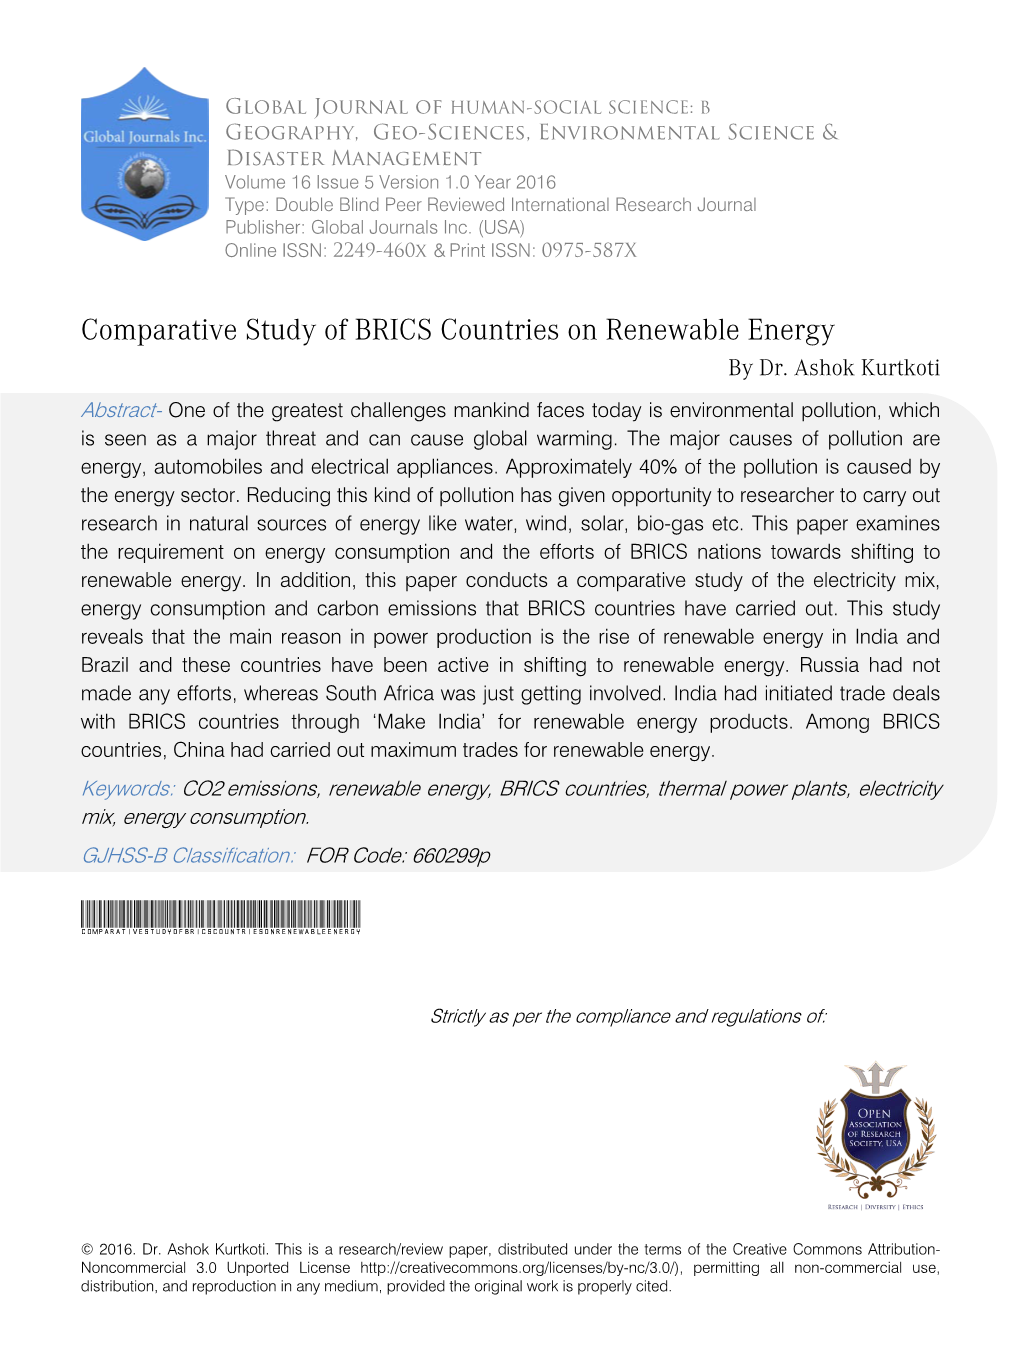 Comparative Study of BRICS Countries on Renewable Energy by Dr